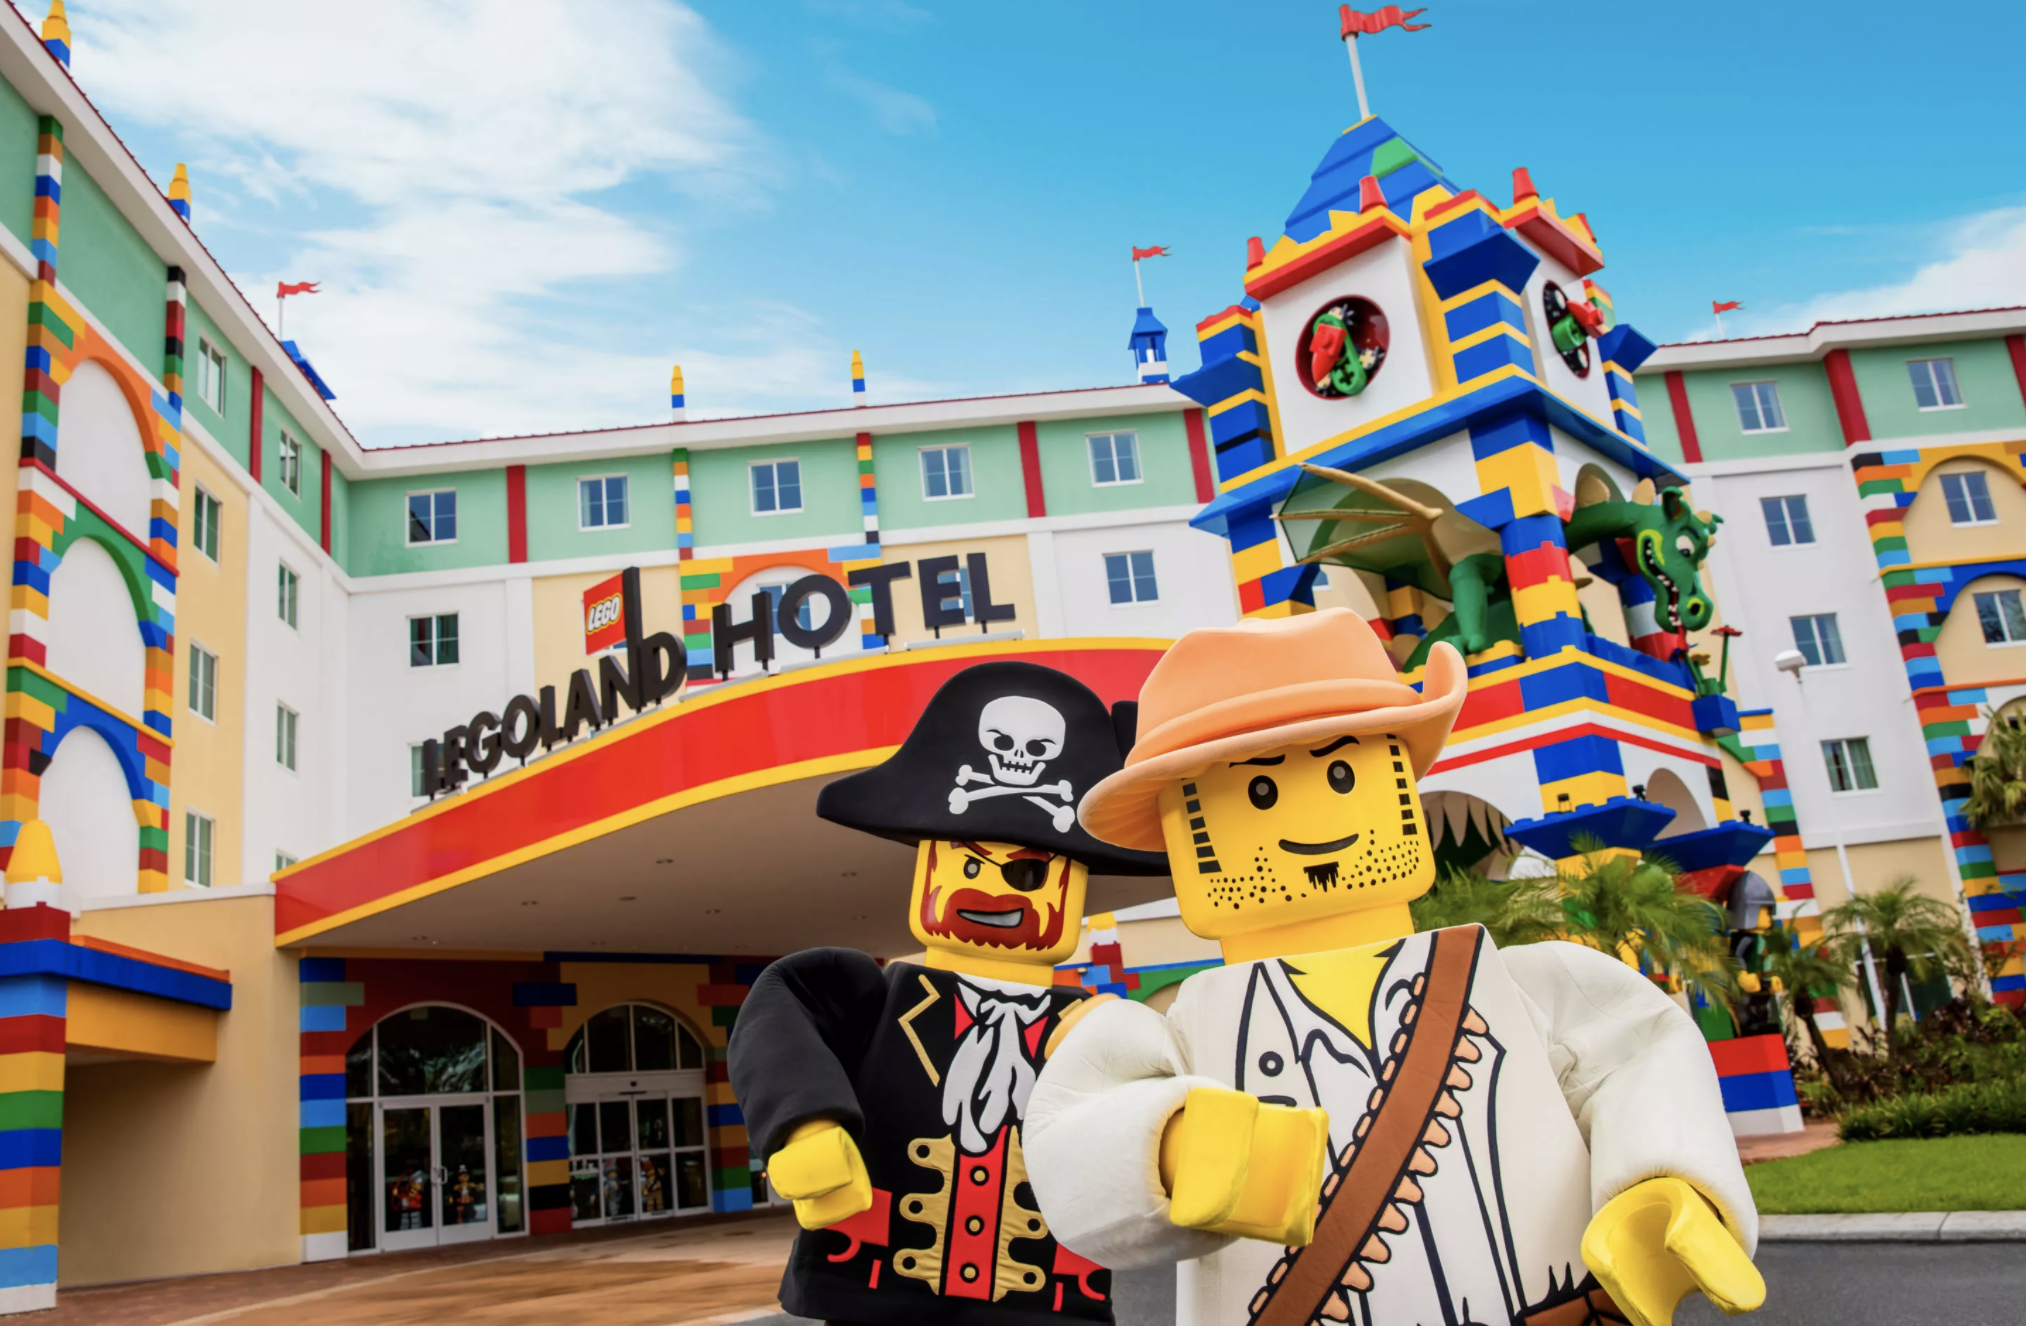 A hotel that looks like it&#x27;s made from Lego, with two Lego characters in the foreground